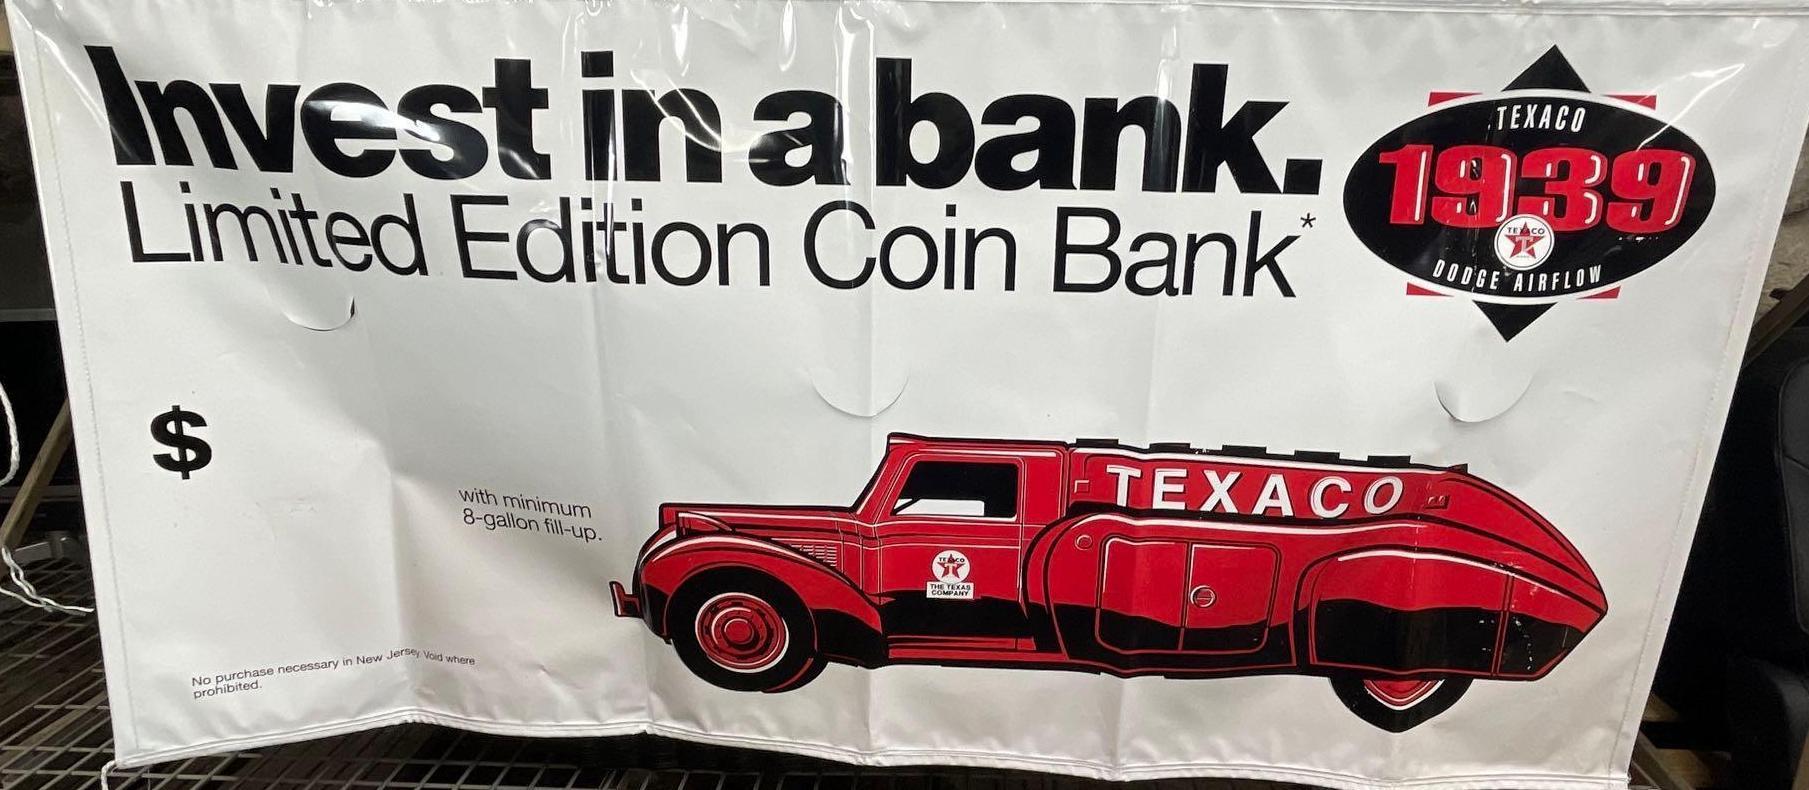 Texaco Limited Edition Coin Bank, Banner, Signs